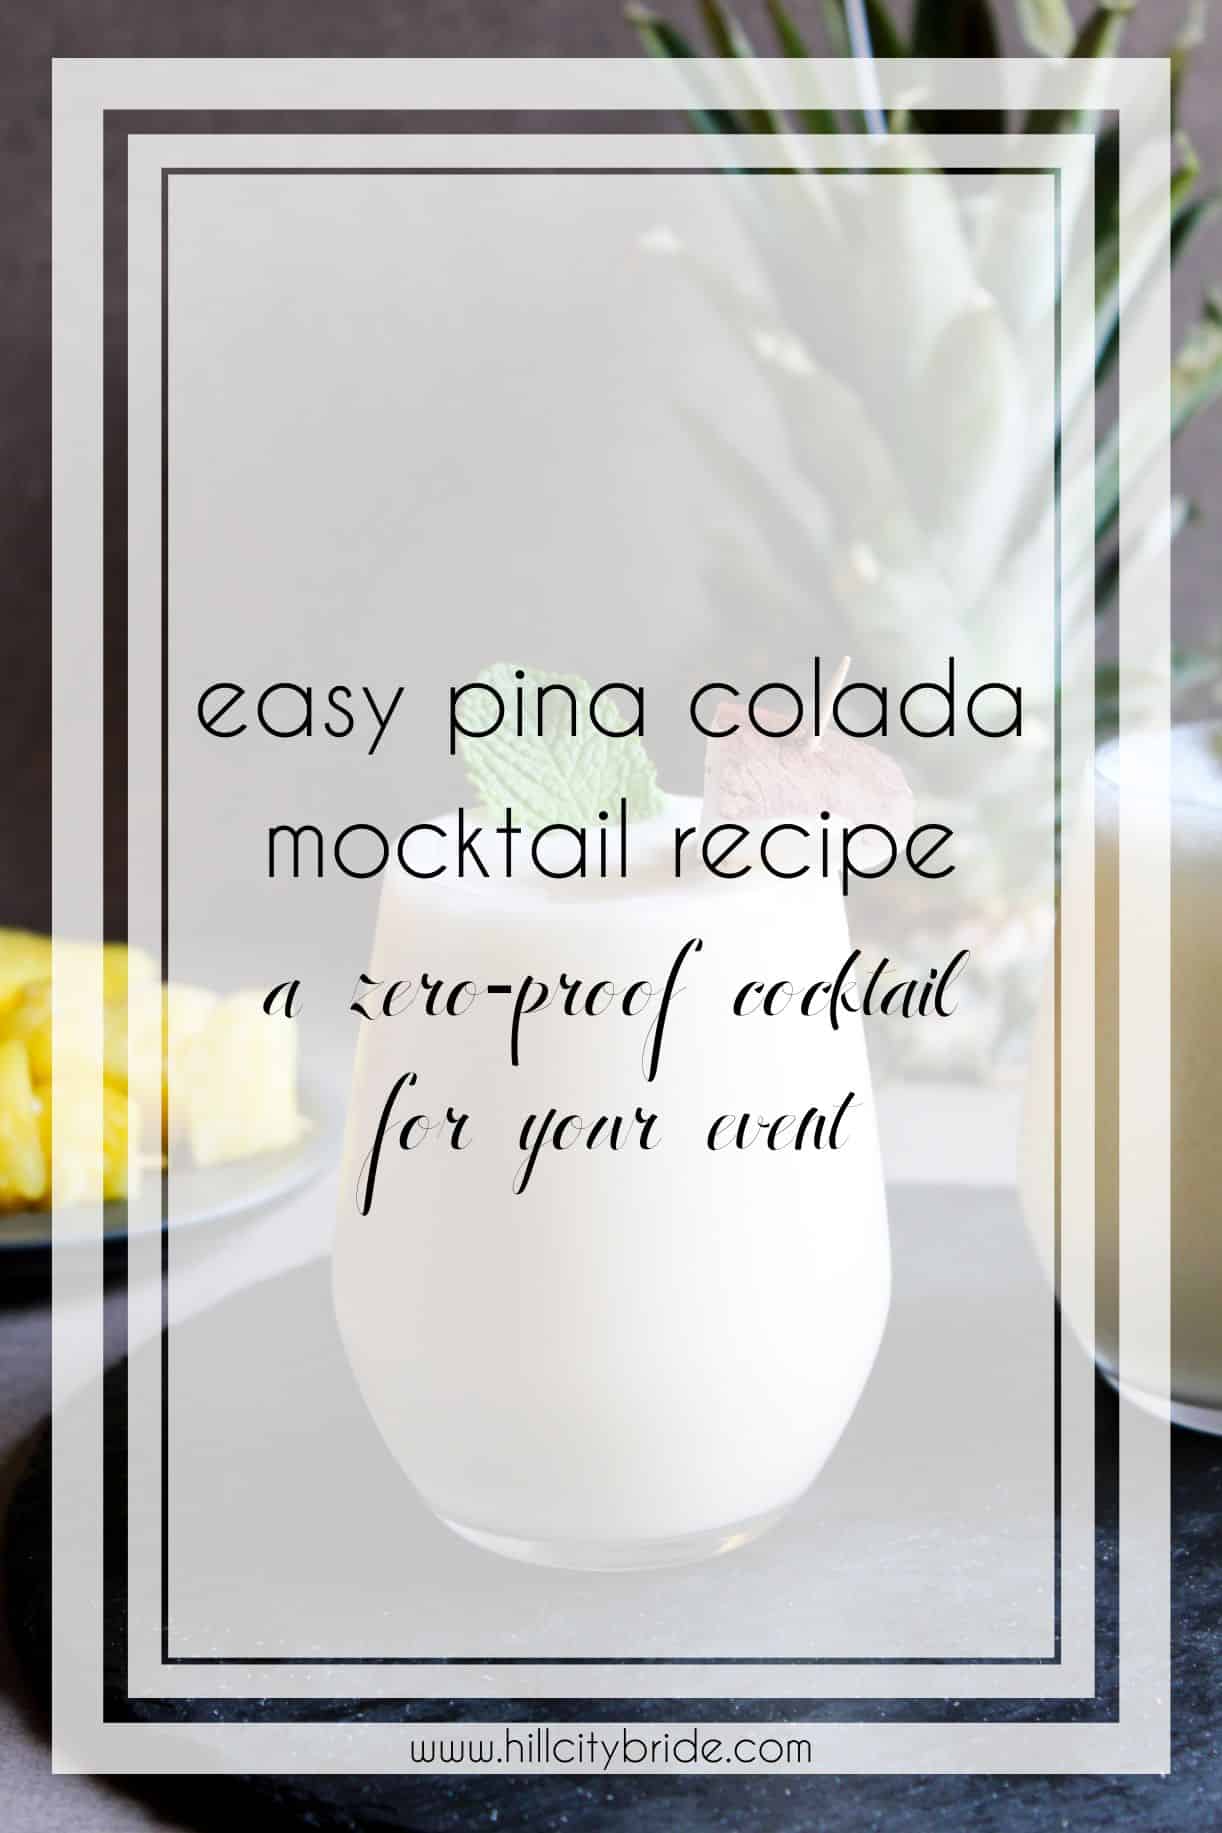 How to Make an Easy Pina Colada Mocktail for Dry January